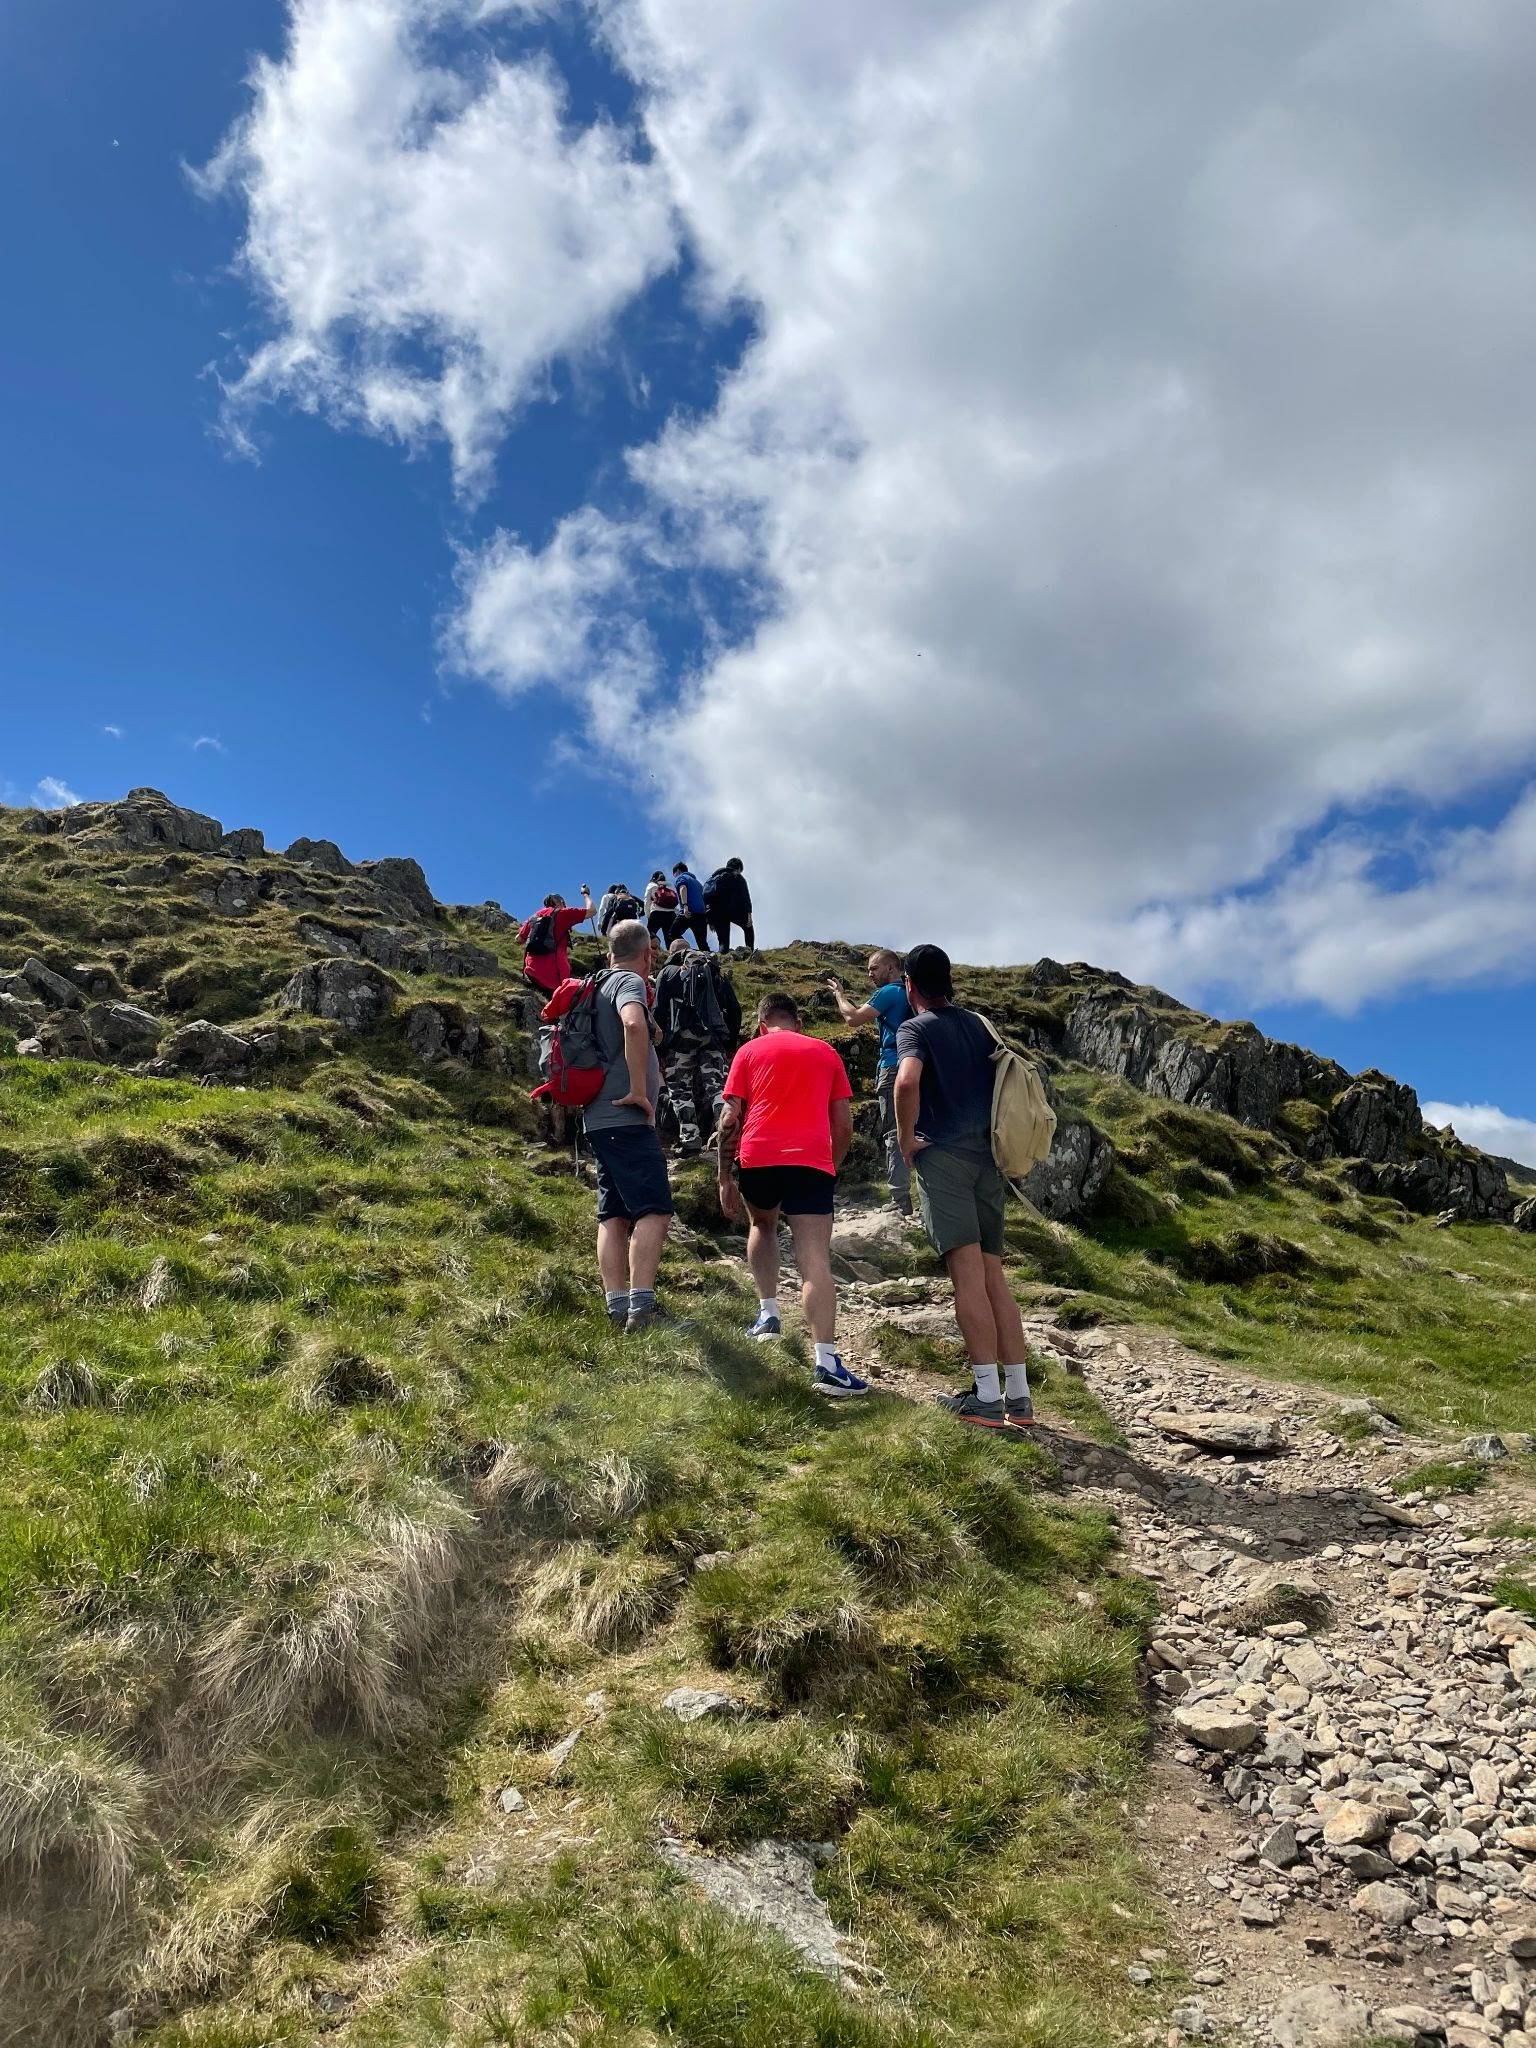 Hikers lining up to make their way over a fell in Glenridding, the Lake District. June 6, 2021.